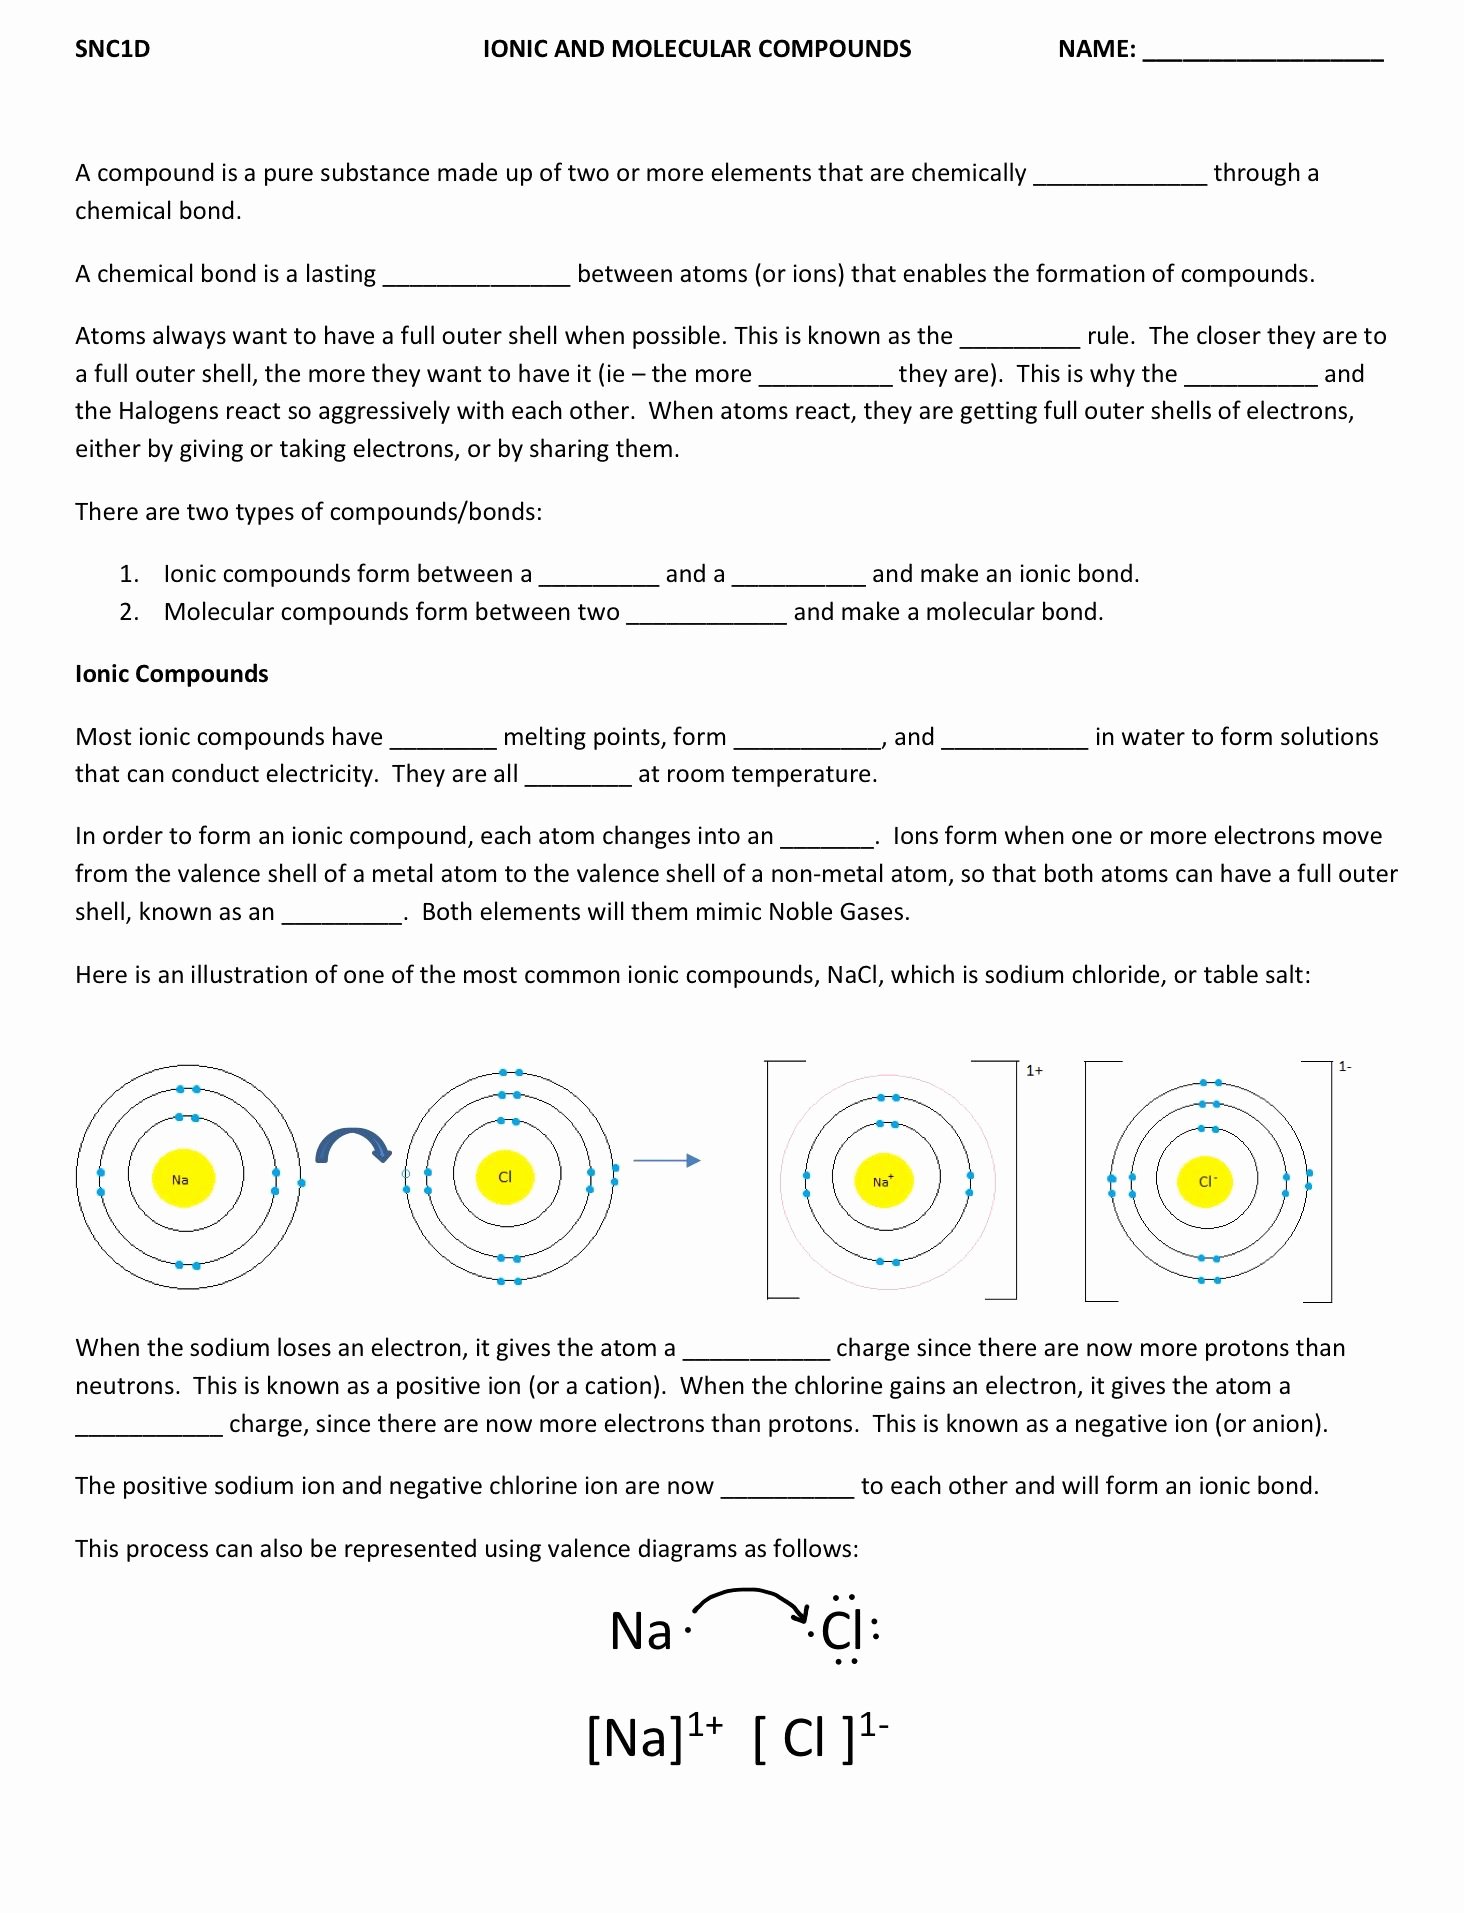 Molecules and Compounds Worksheet Luxury Molecular and Ionic Pounds Note &amp; Worksheet